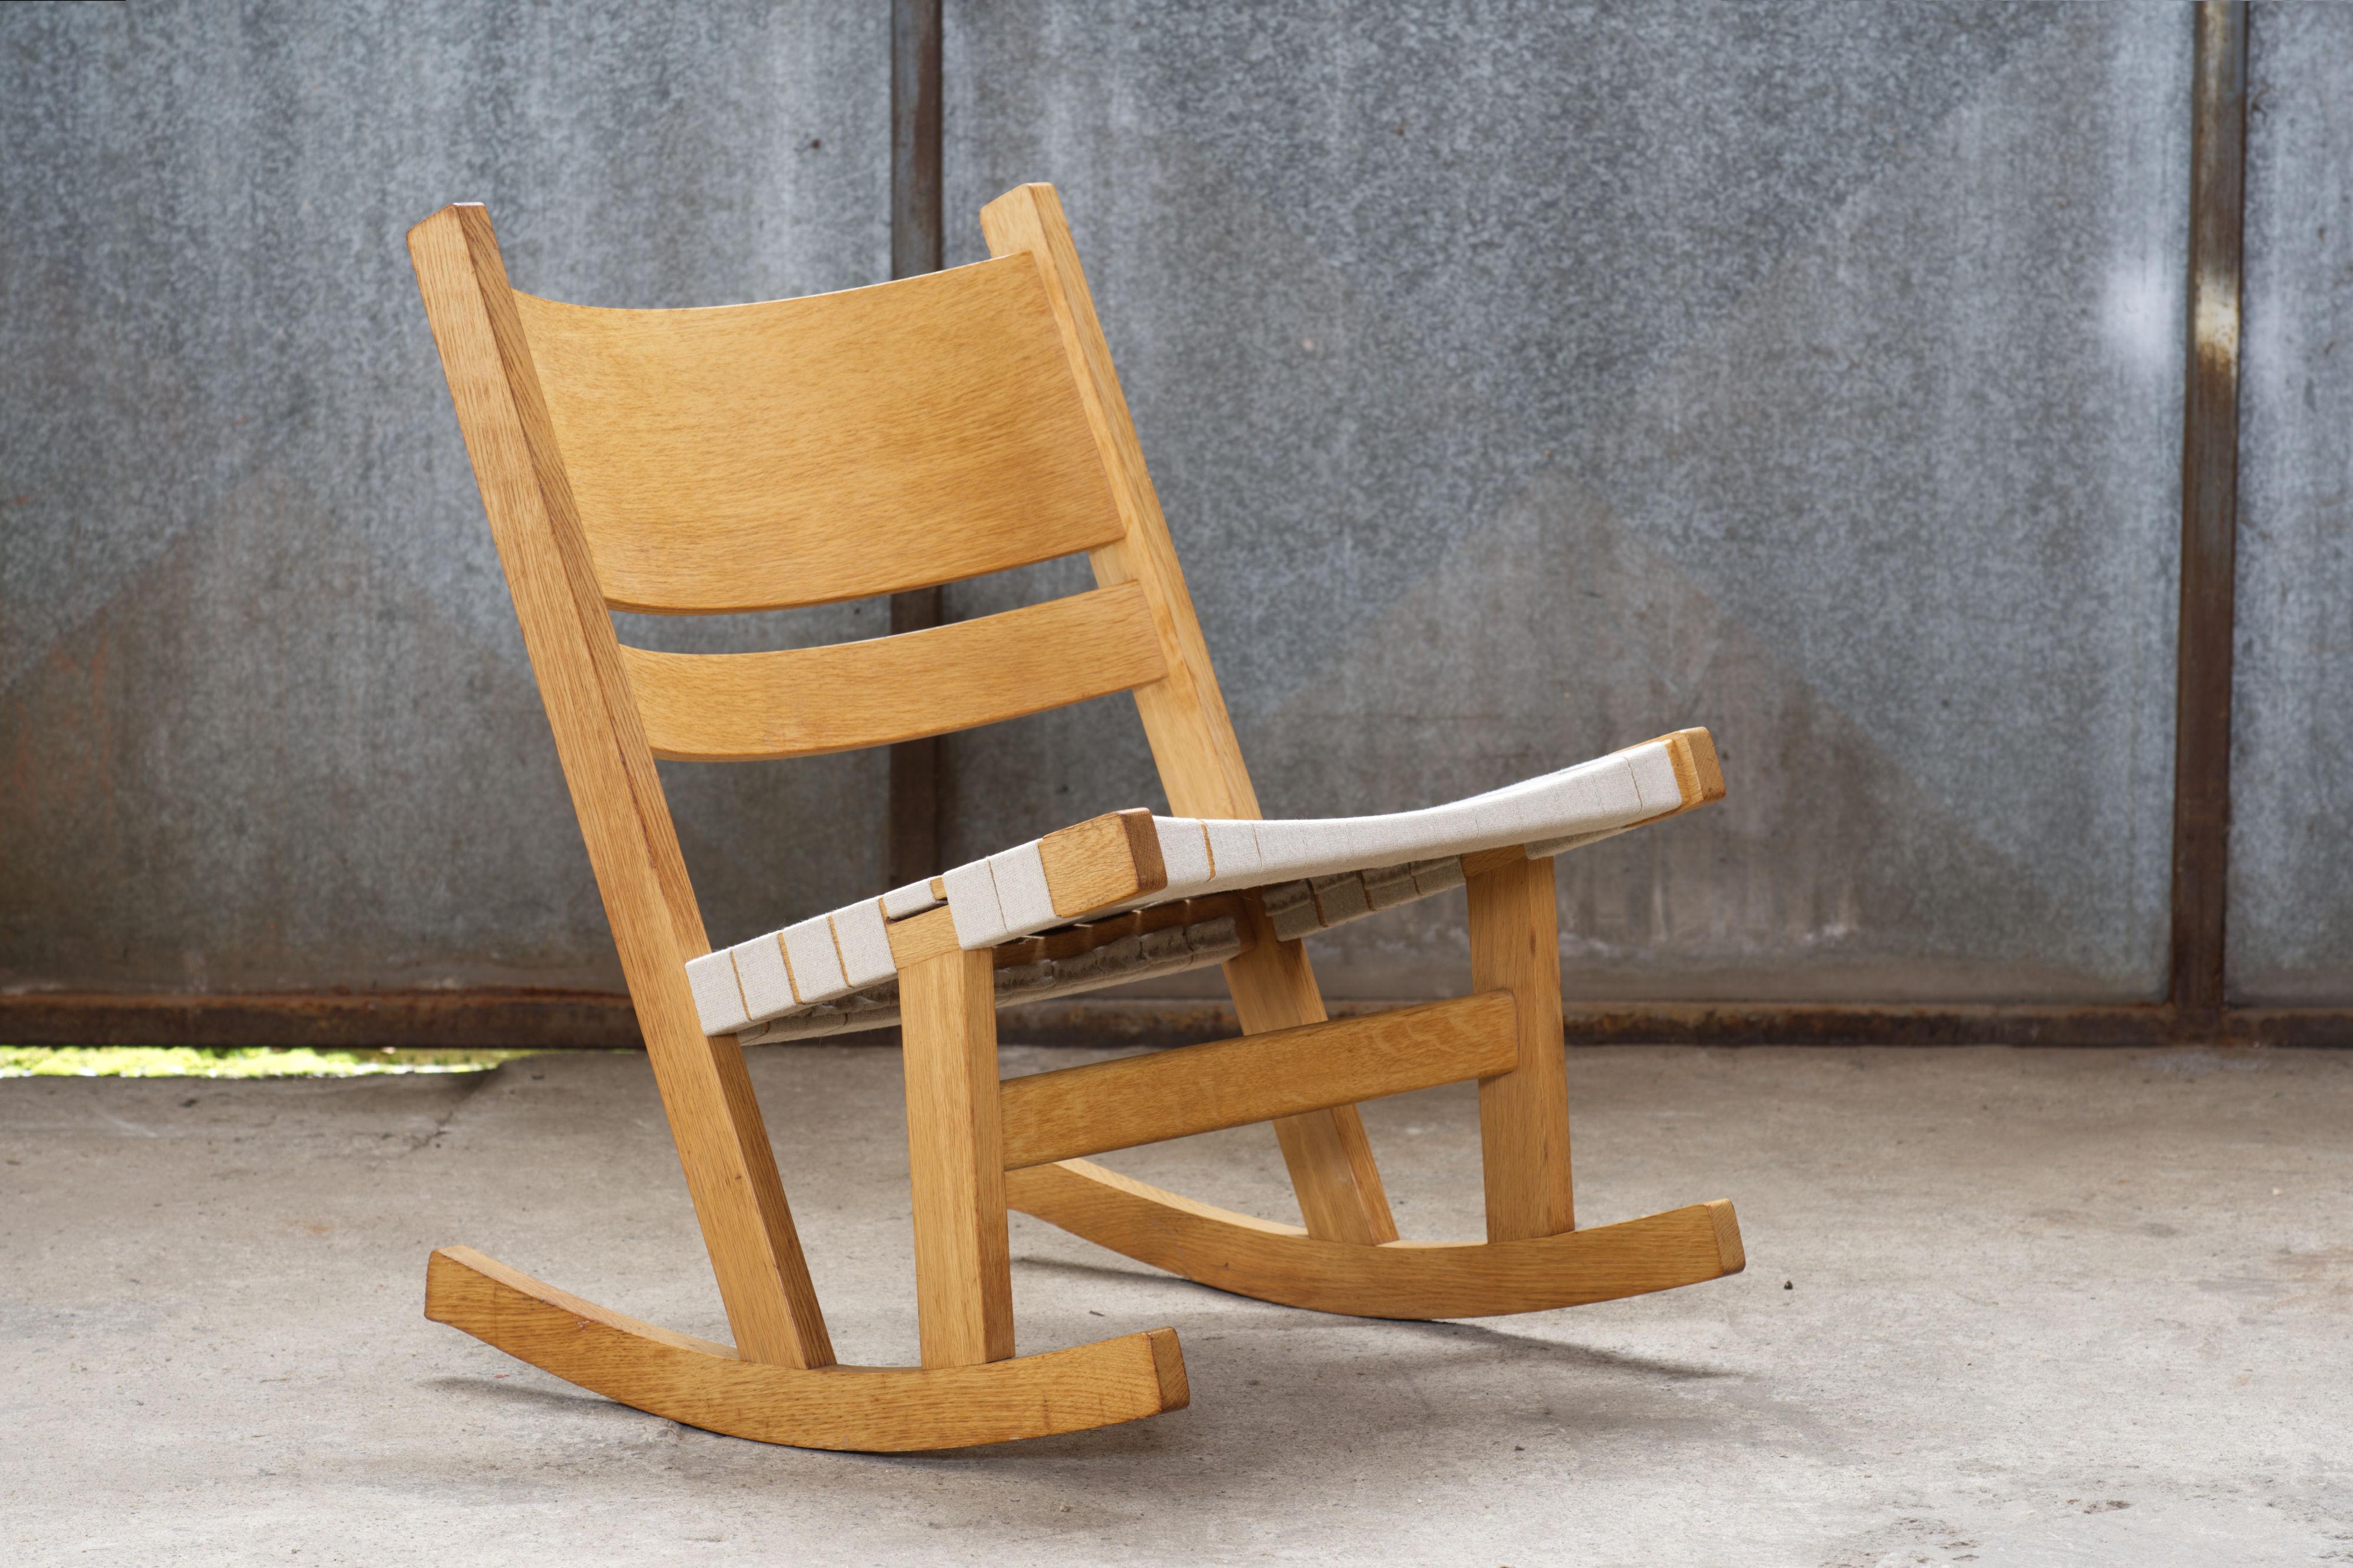 A very rare oak rocking chair with a natural canvas woven webbing seat. Manufactured in limited quantities by Getama in the 1970s. A timeless design by Hans Wegner combining simple and elegant lines and construction methods.

A useful and